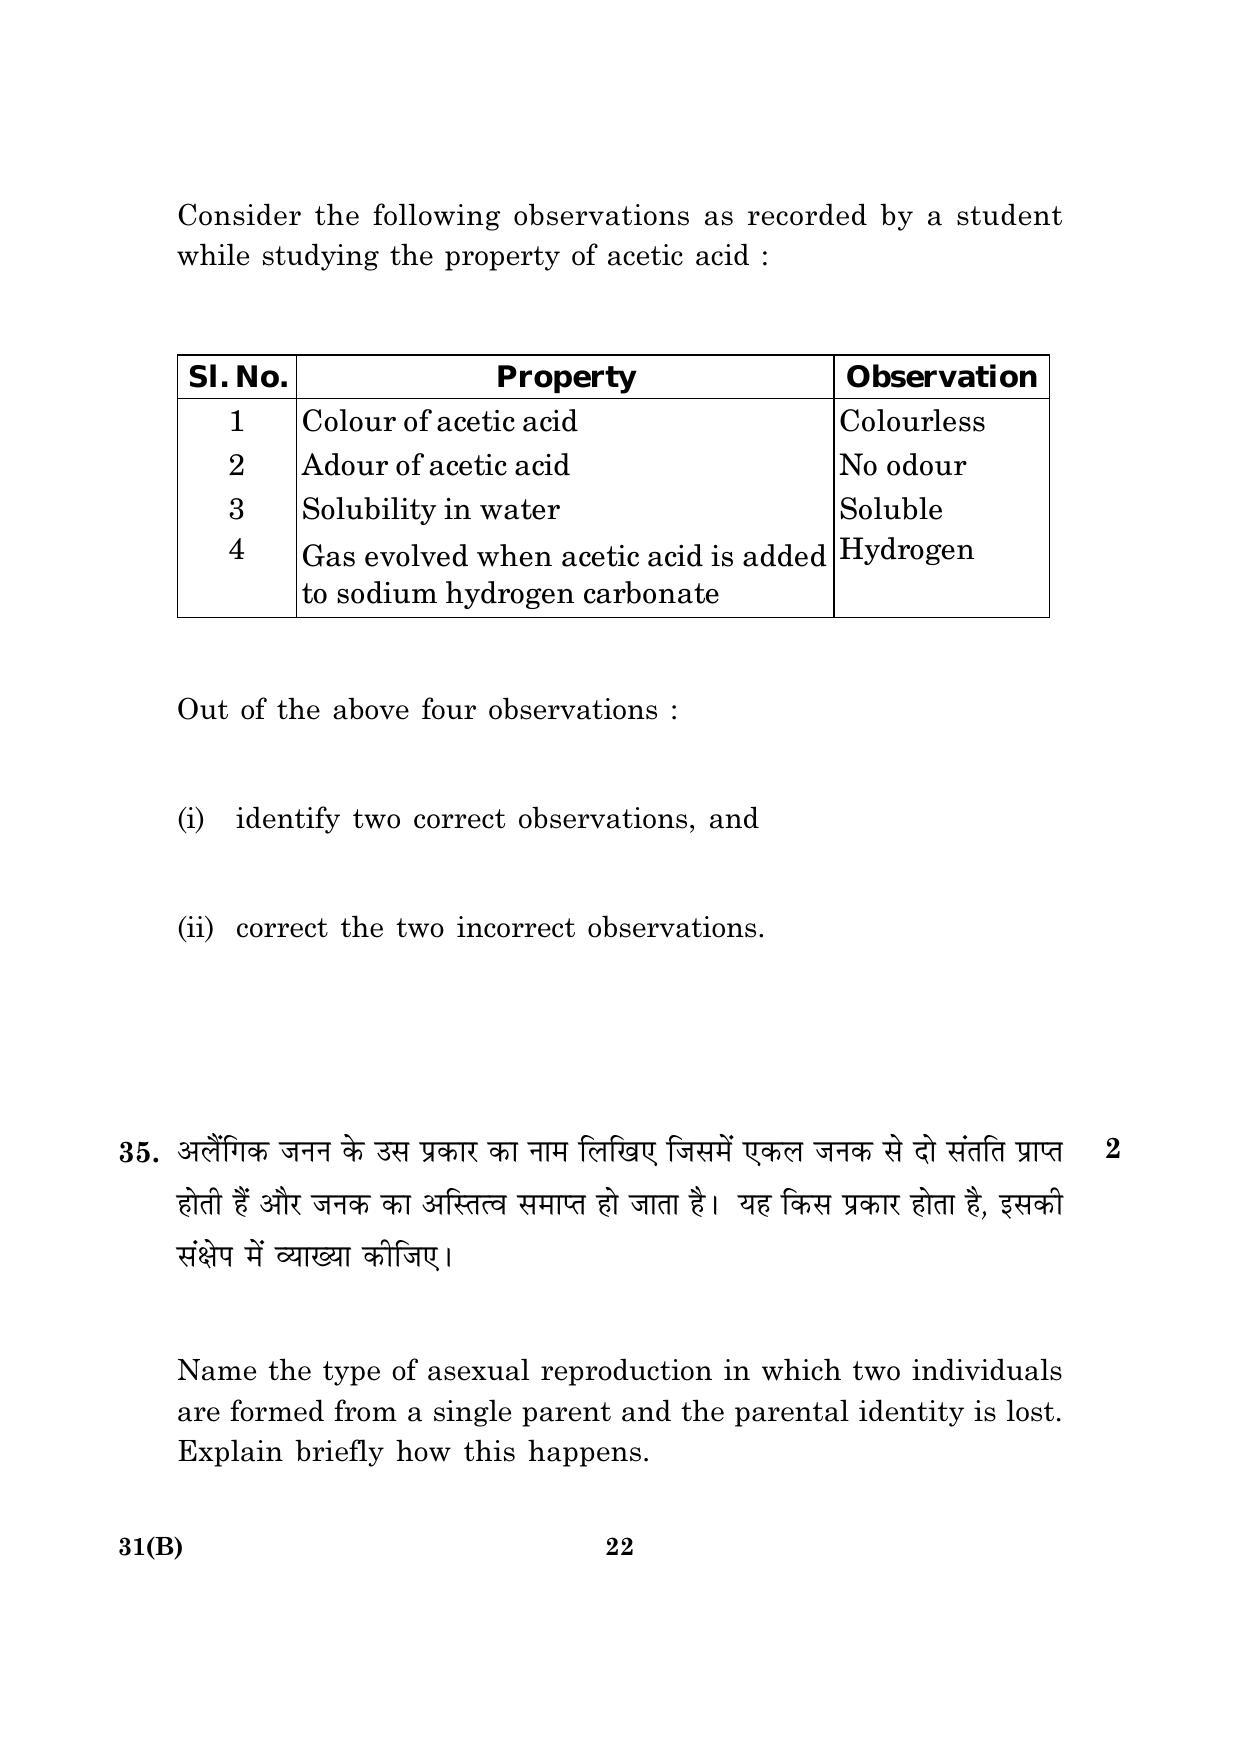 CBSE Class 10 031(B) Science 2016 Question Paper - Page 22